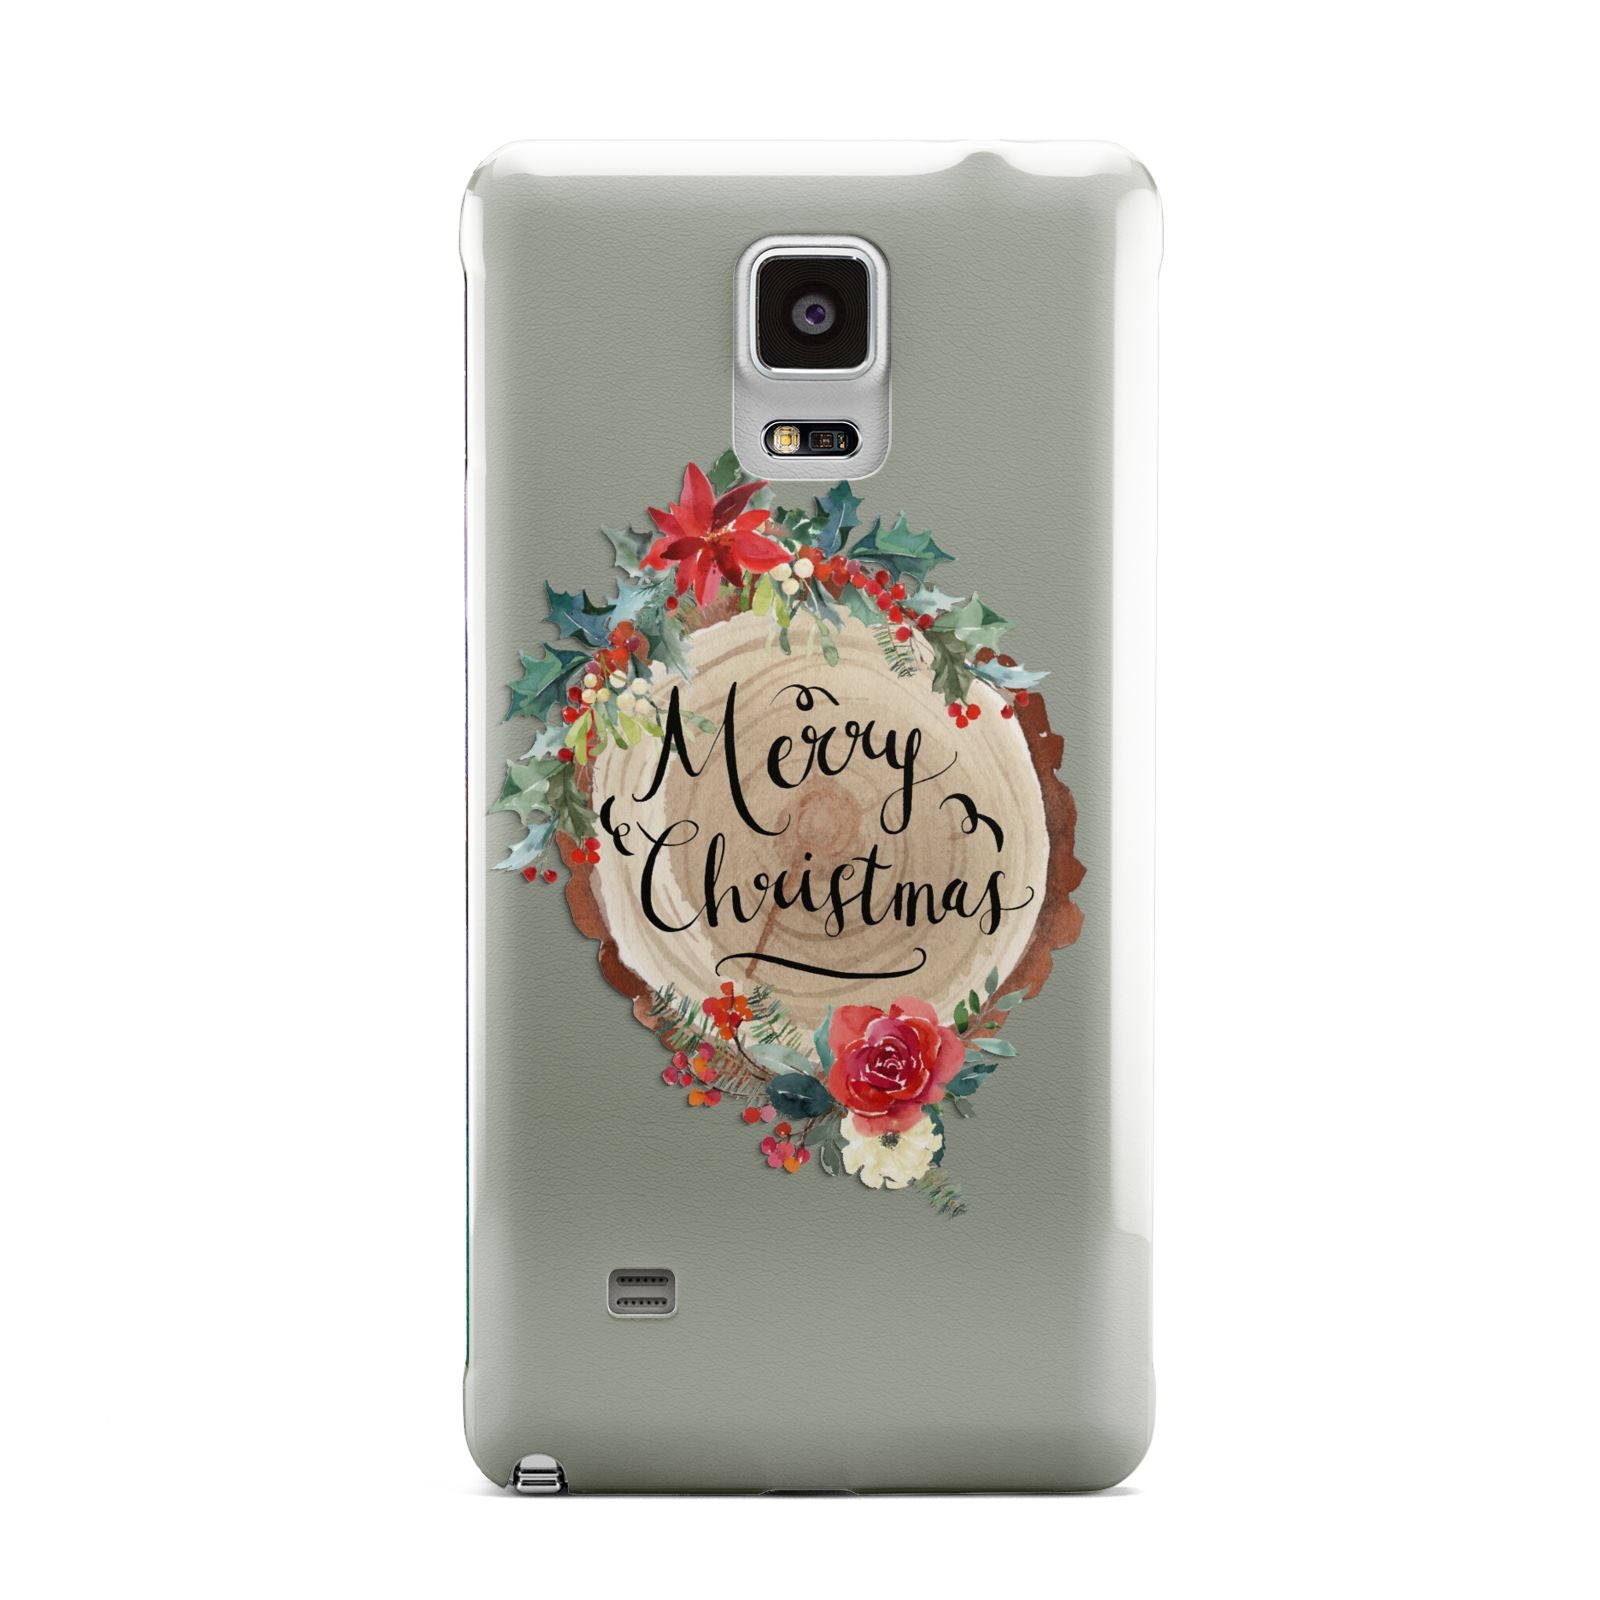 Merry Christmas Log Floral Samsung Galaxy Note 4 Case